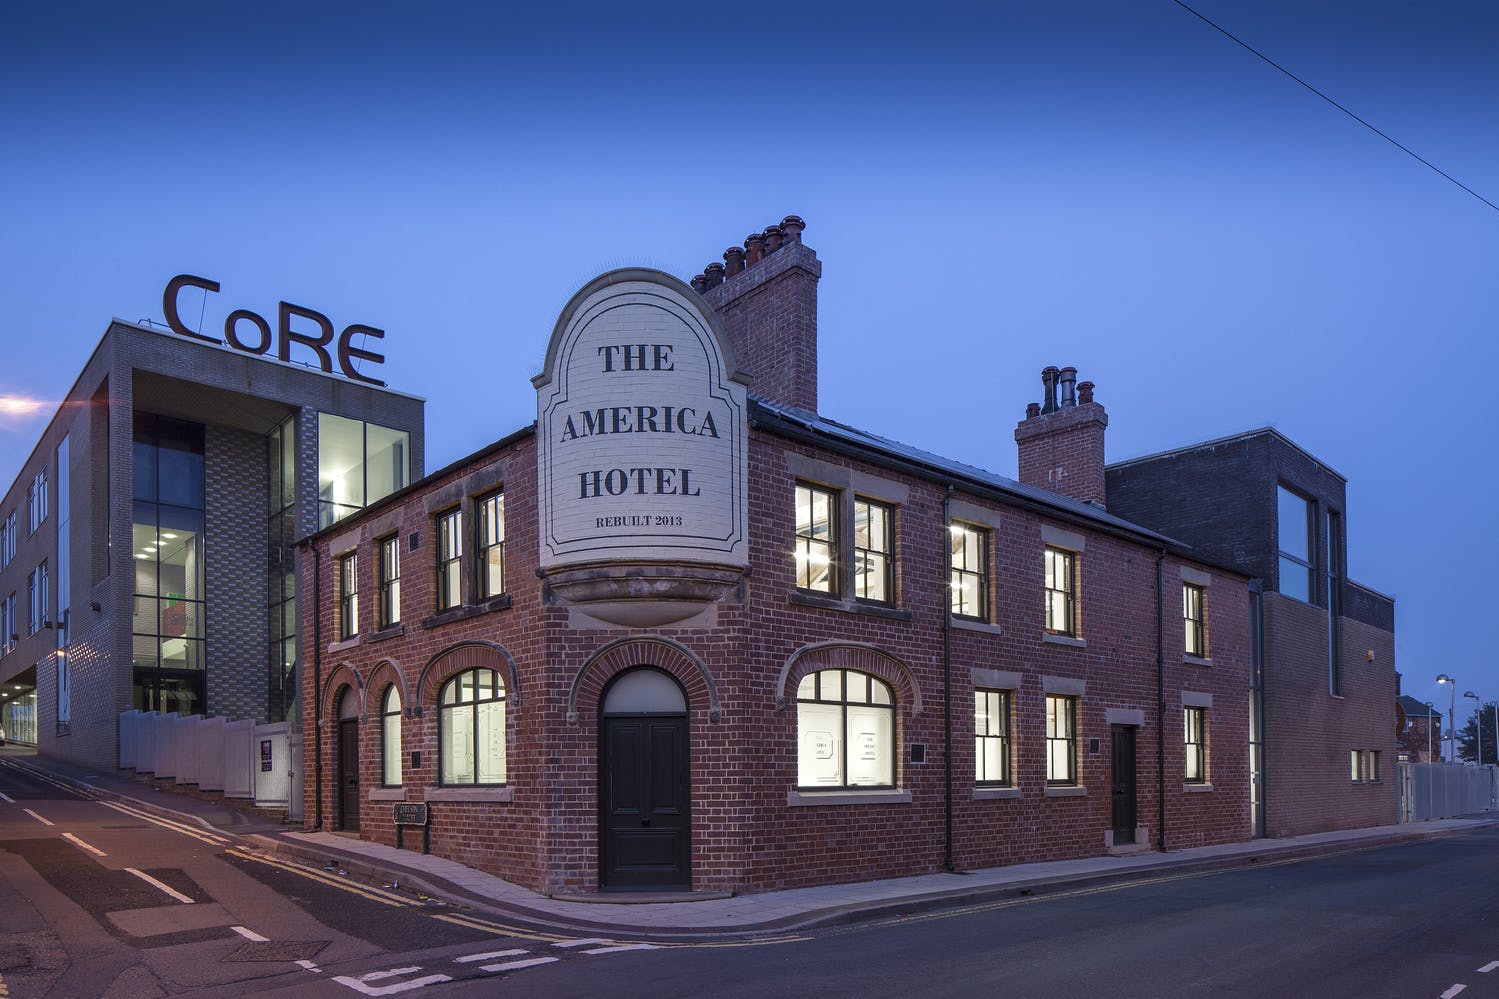 Stoke-on-Trent's Centre for Refurbishment Excellence (CoRE), formerly the disused Enson Works and The America Hotel